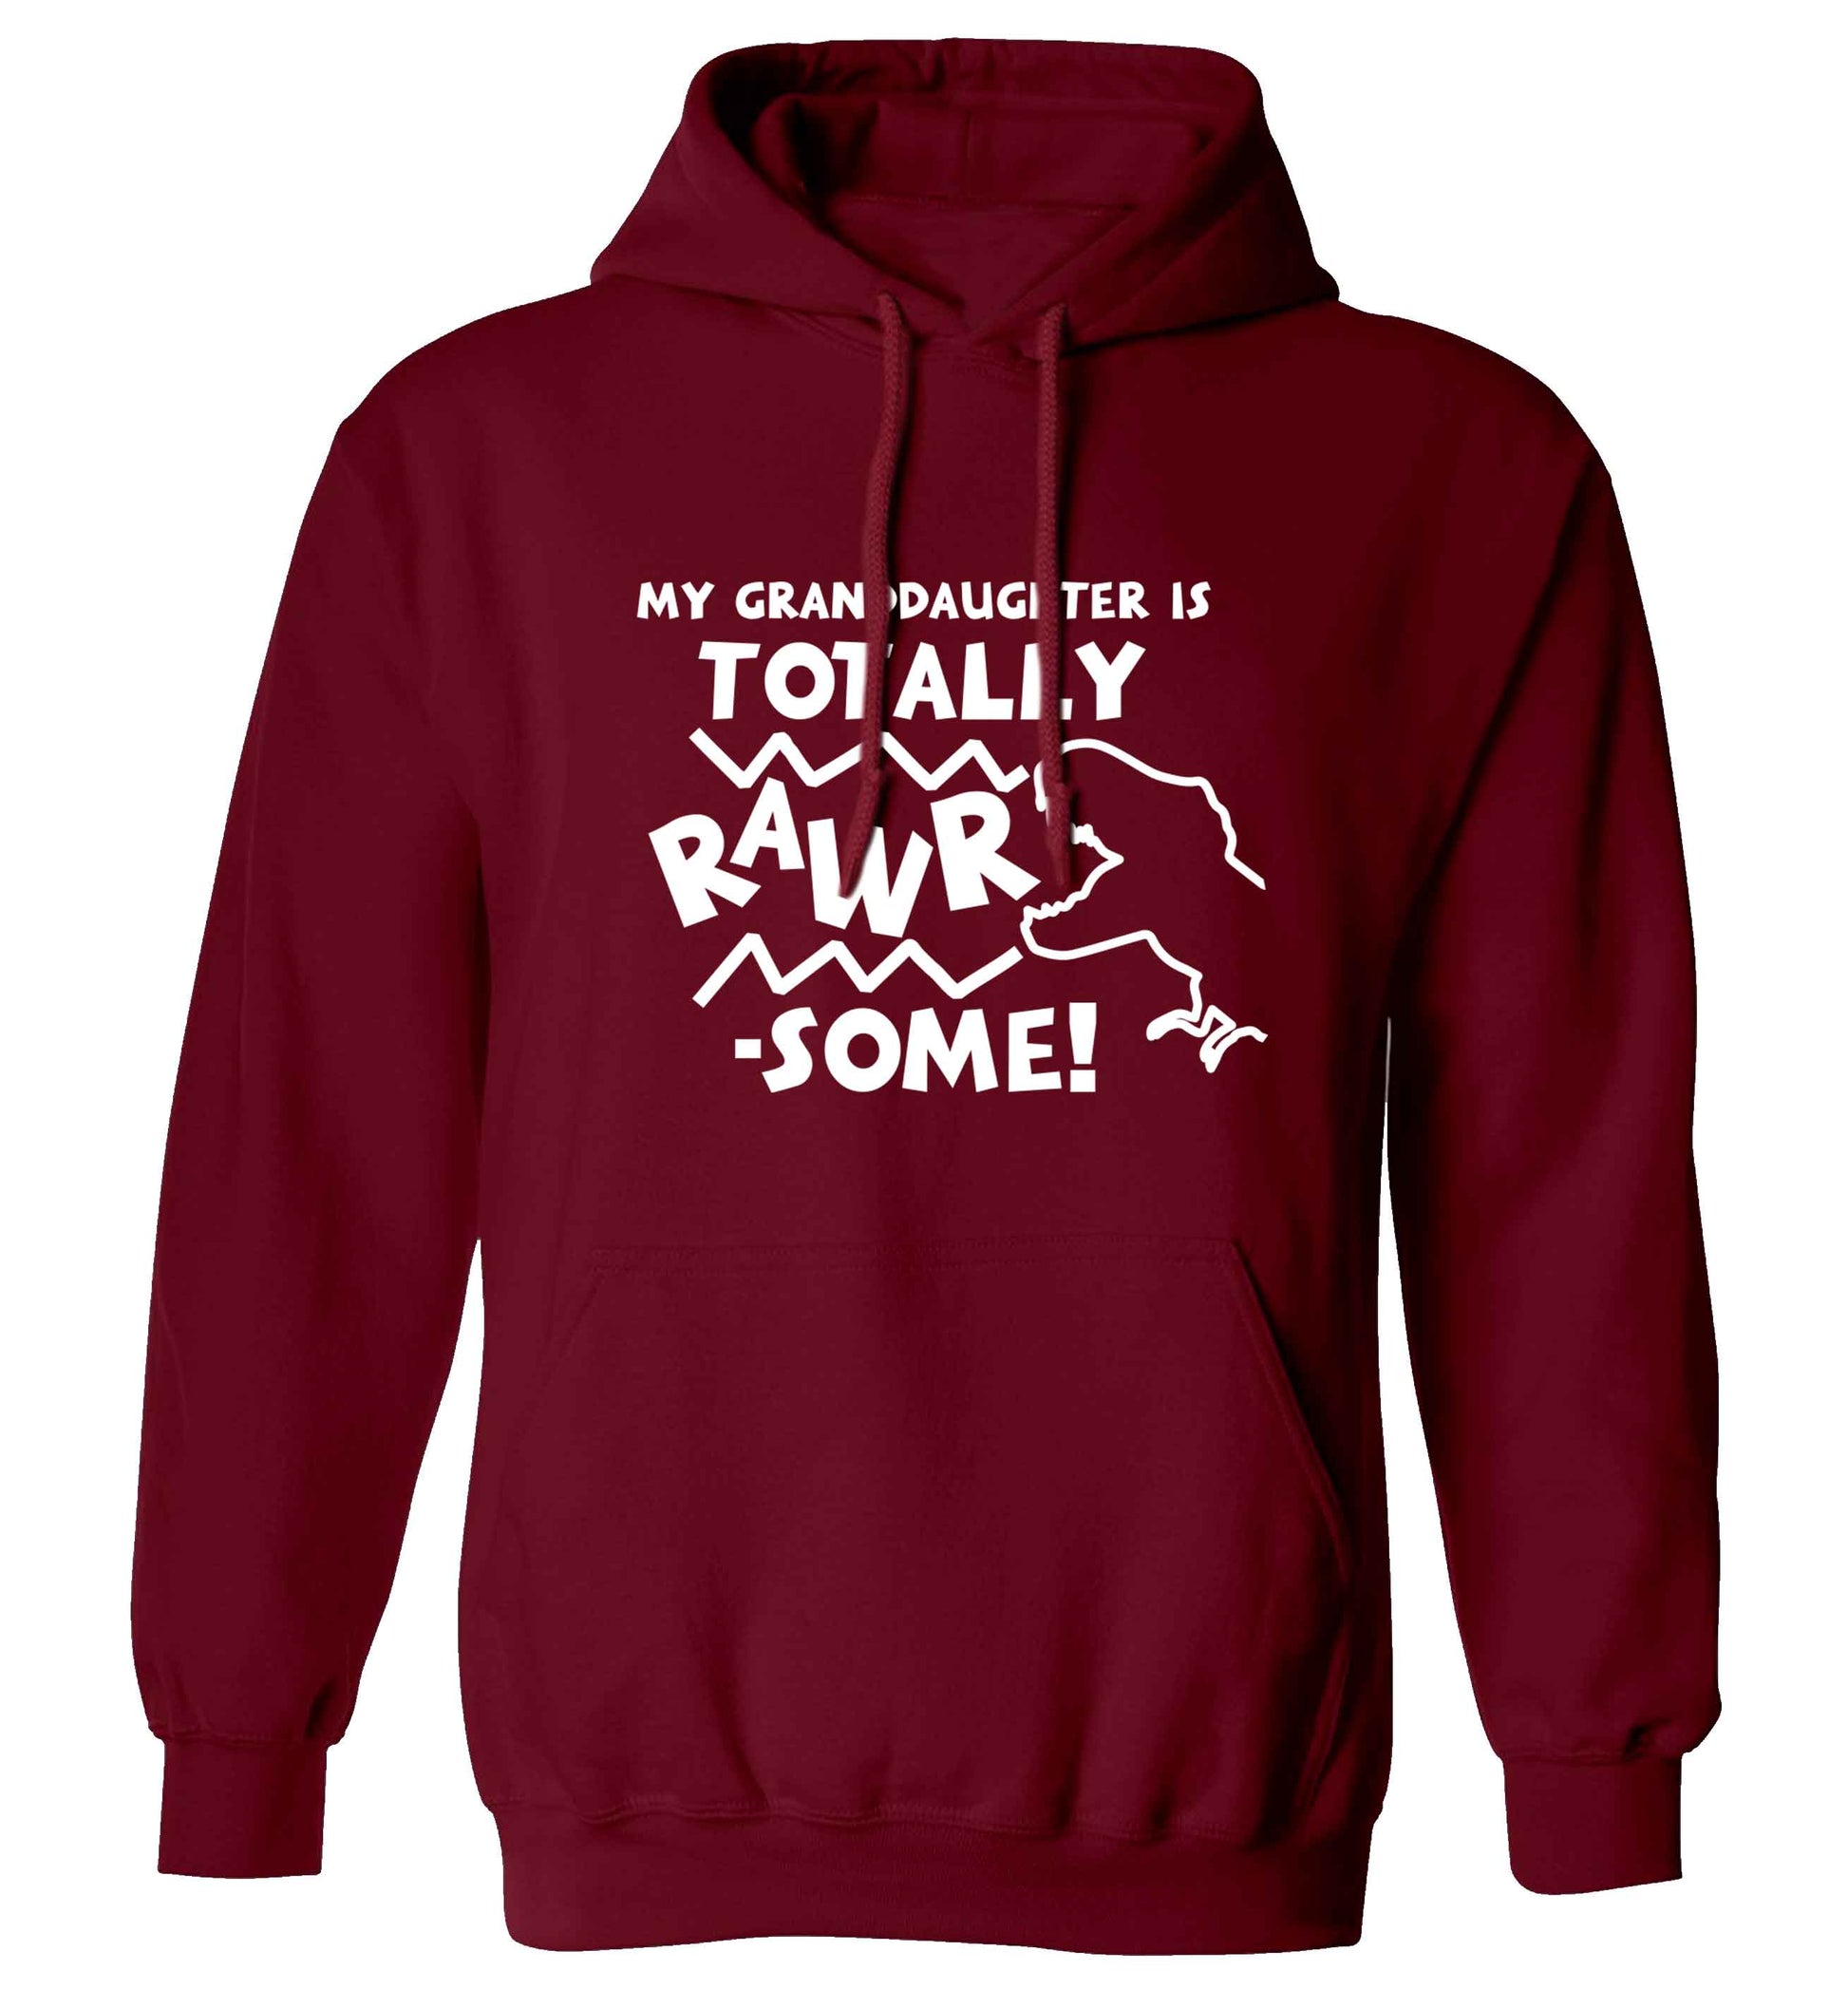 My granddaughter is totally rawrsome adults unisex maroon hoodie 2XL